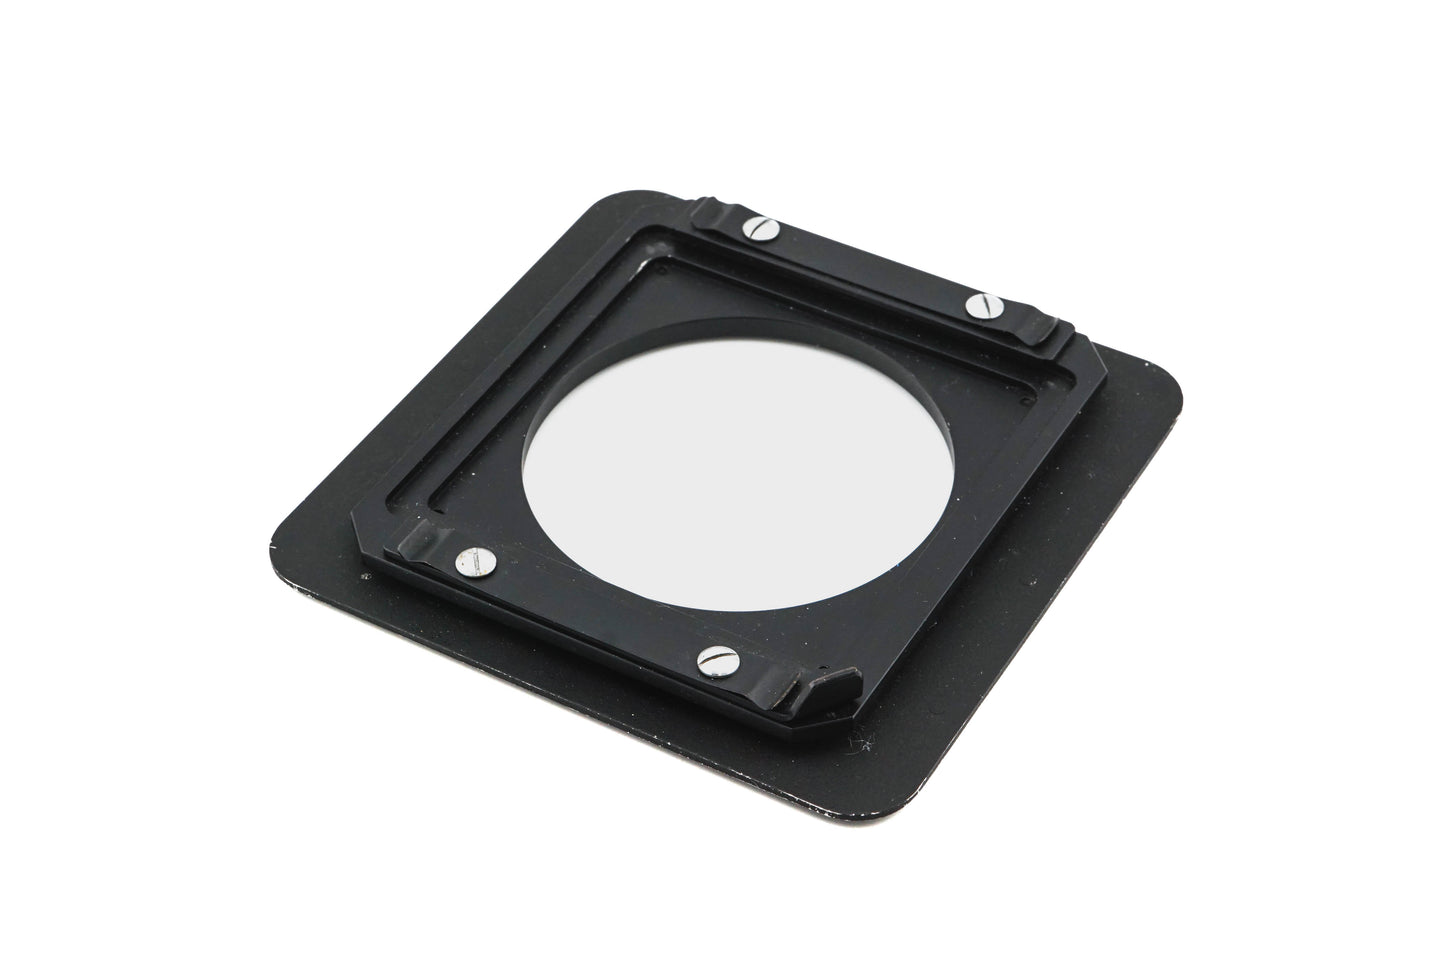 Toyo Adapter Board 110mm x 110mm To Accept 79mm x 79mm Lens Boards